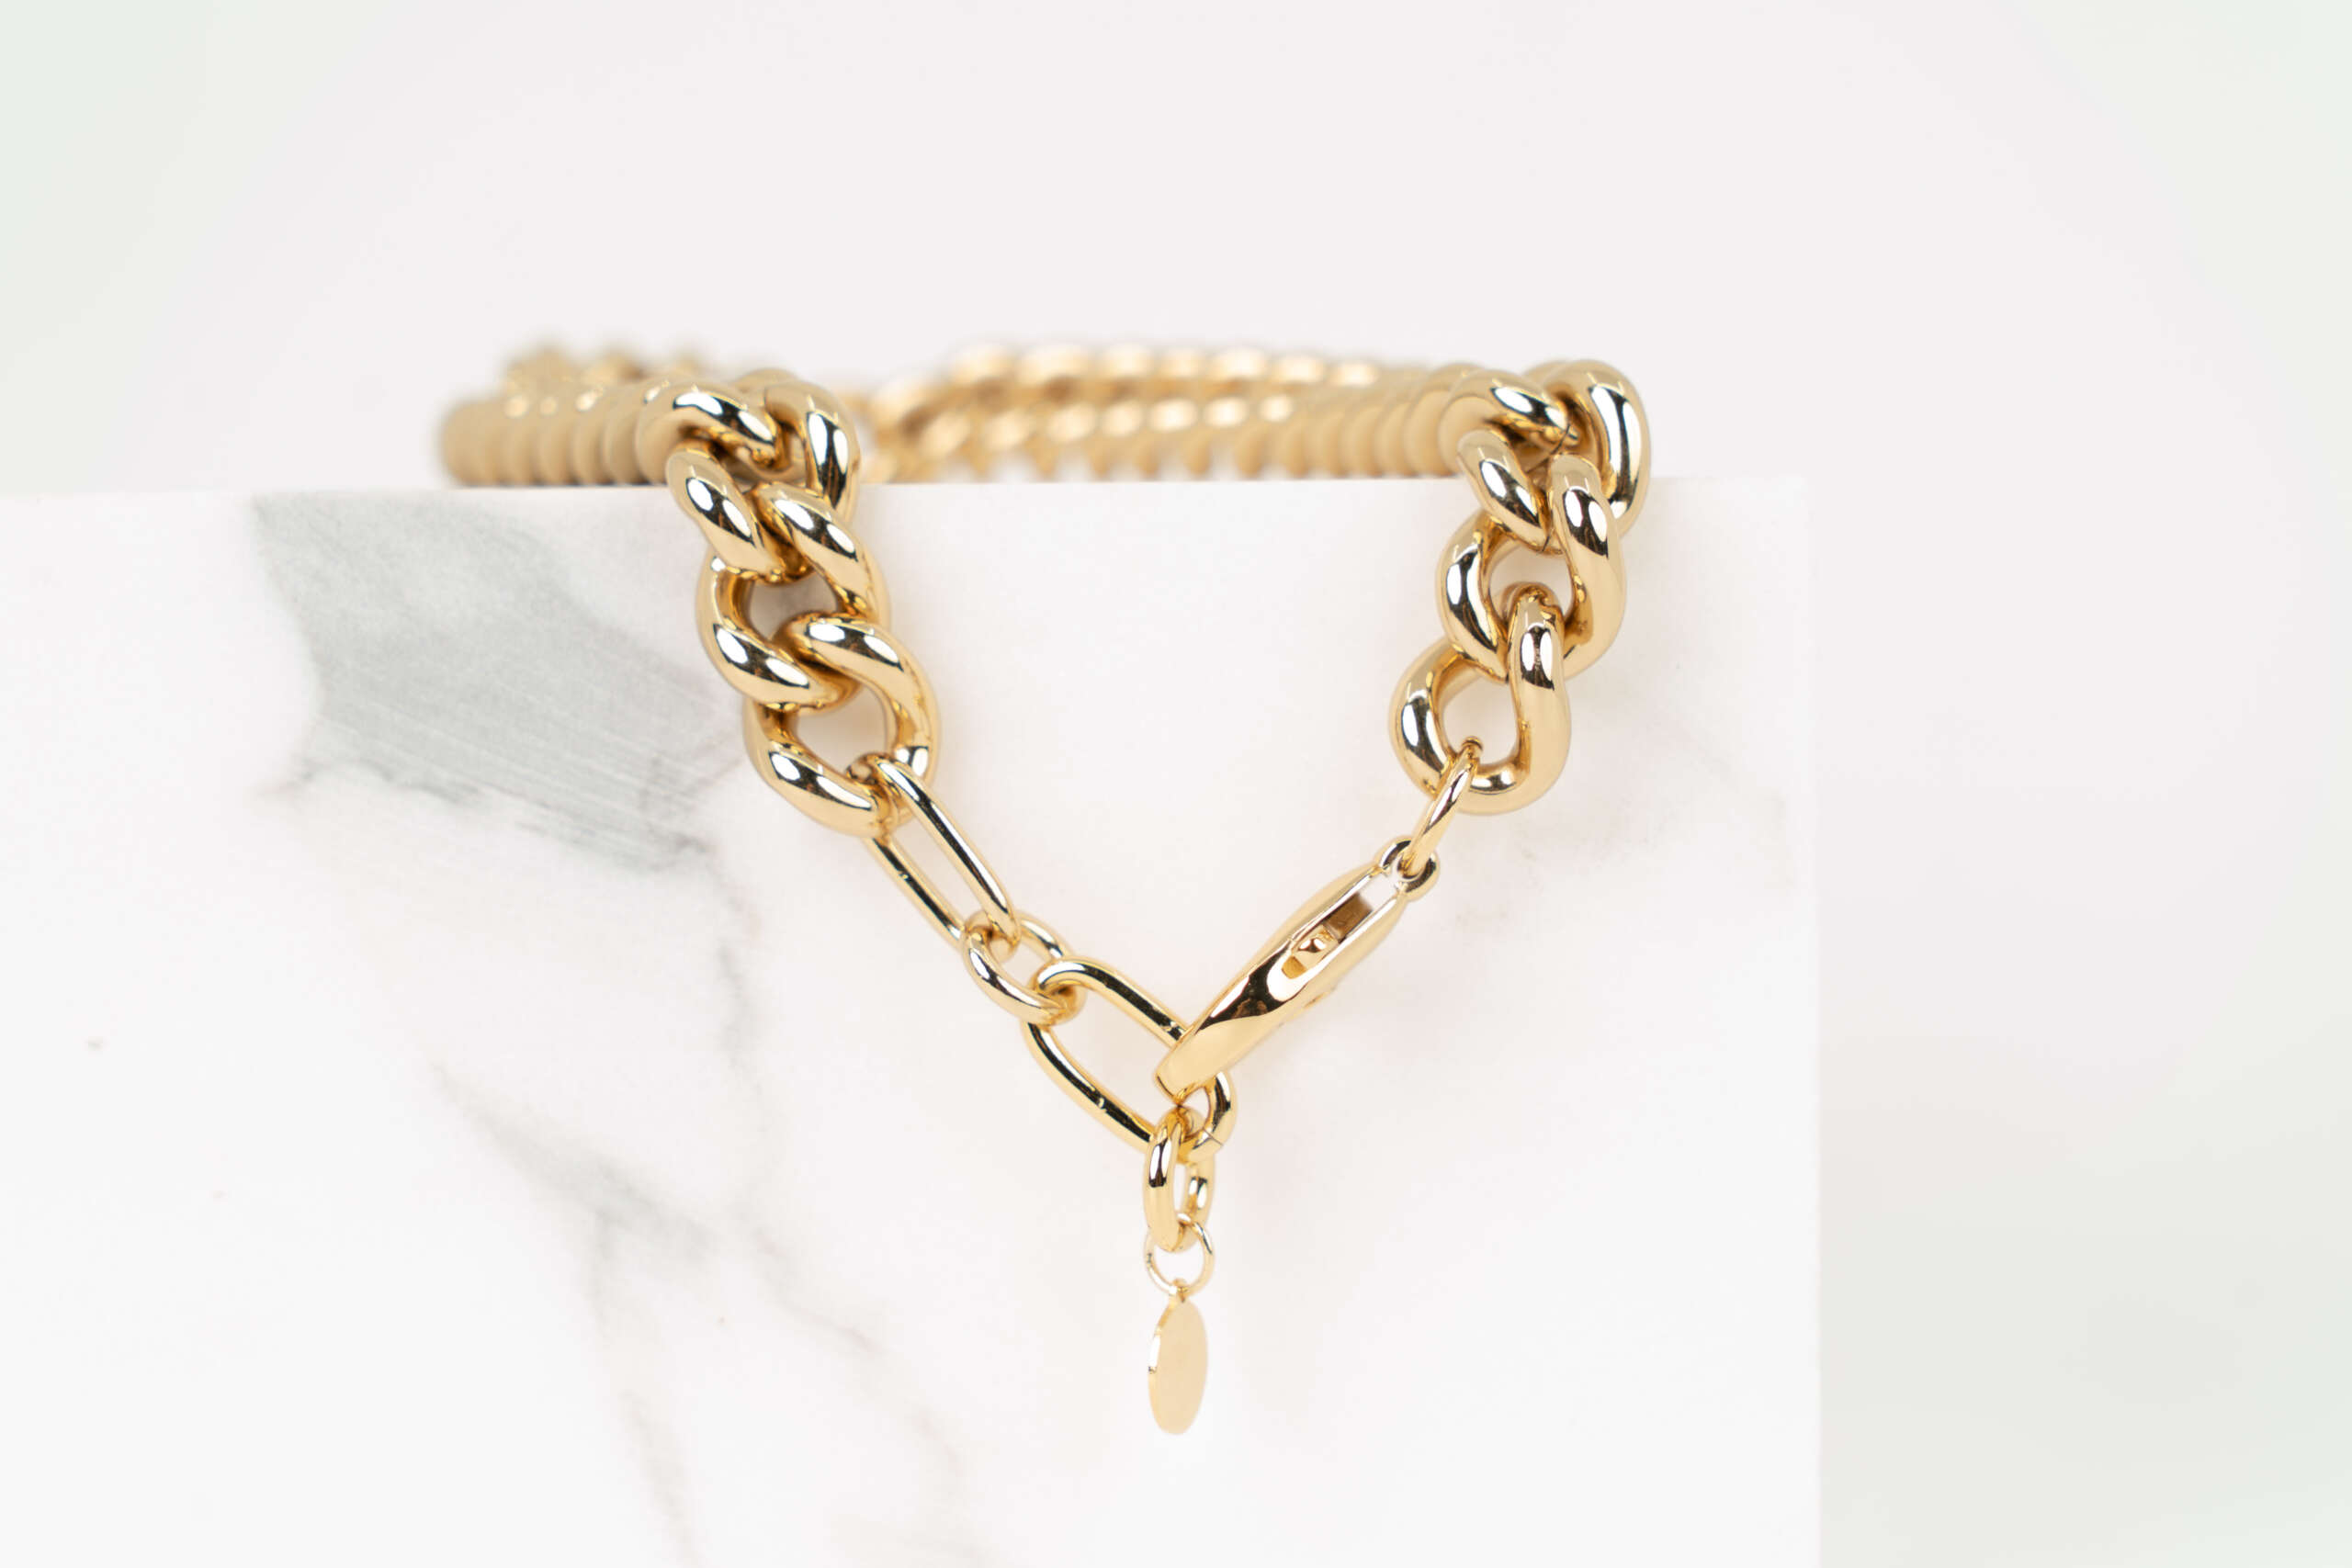 Gourmet chain small gold necklace